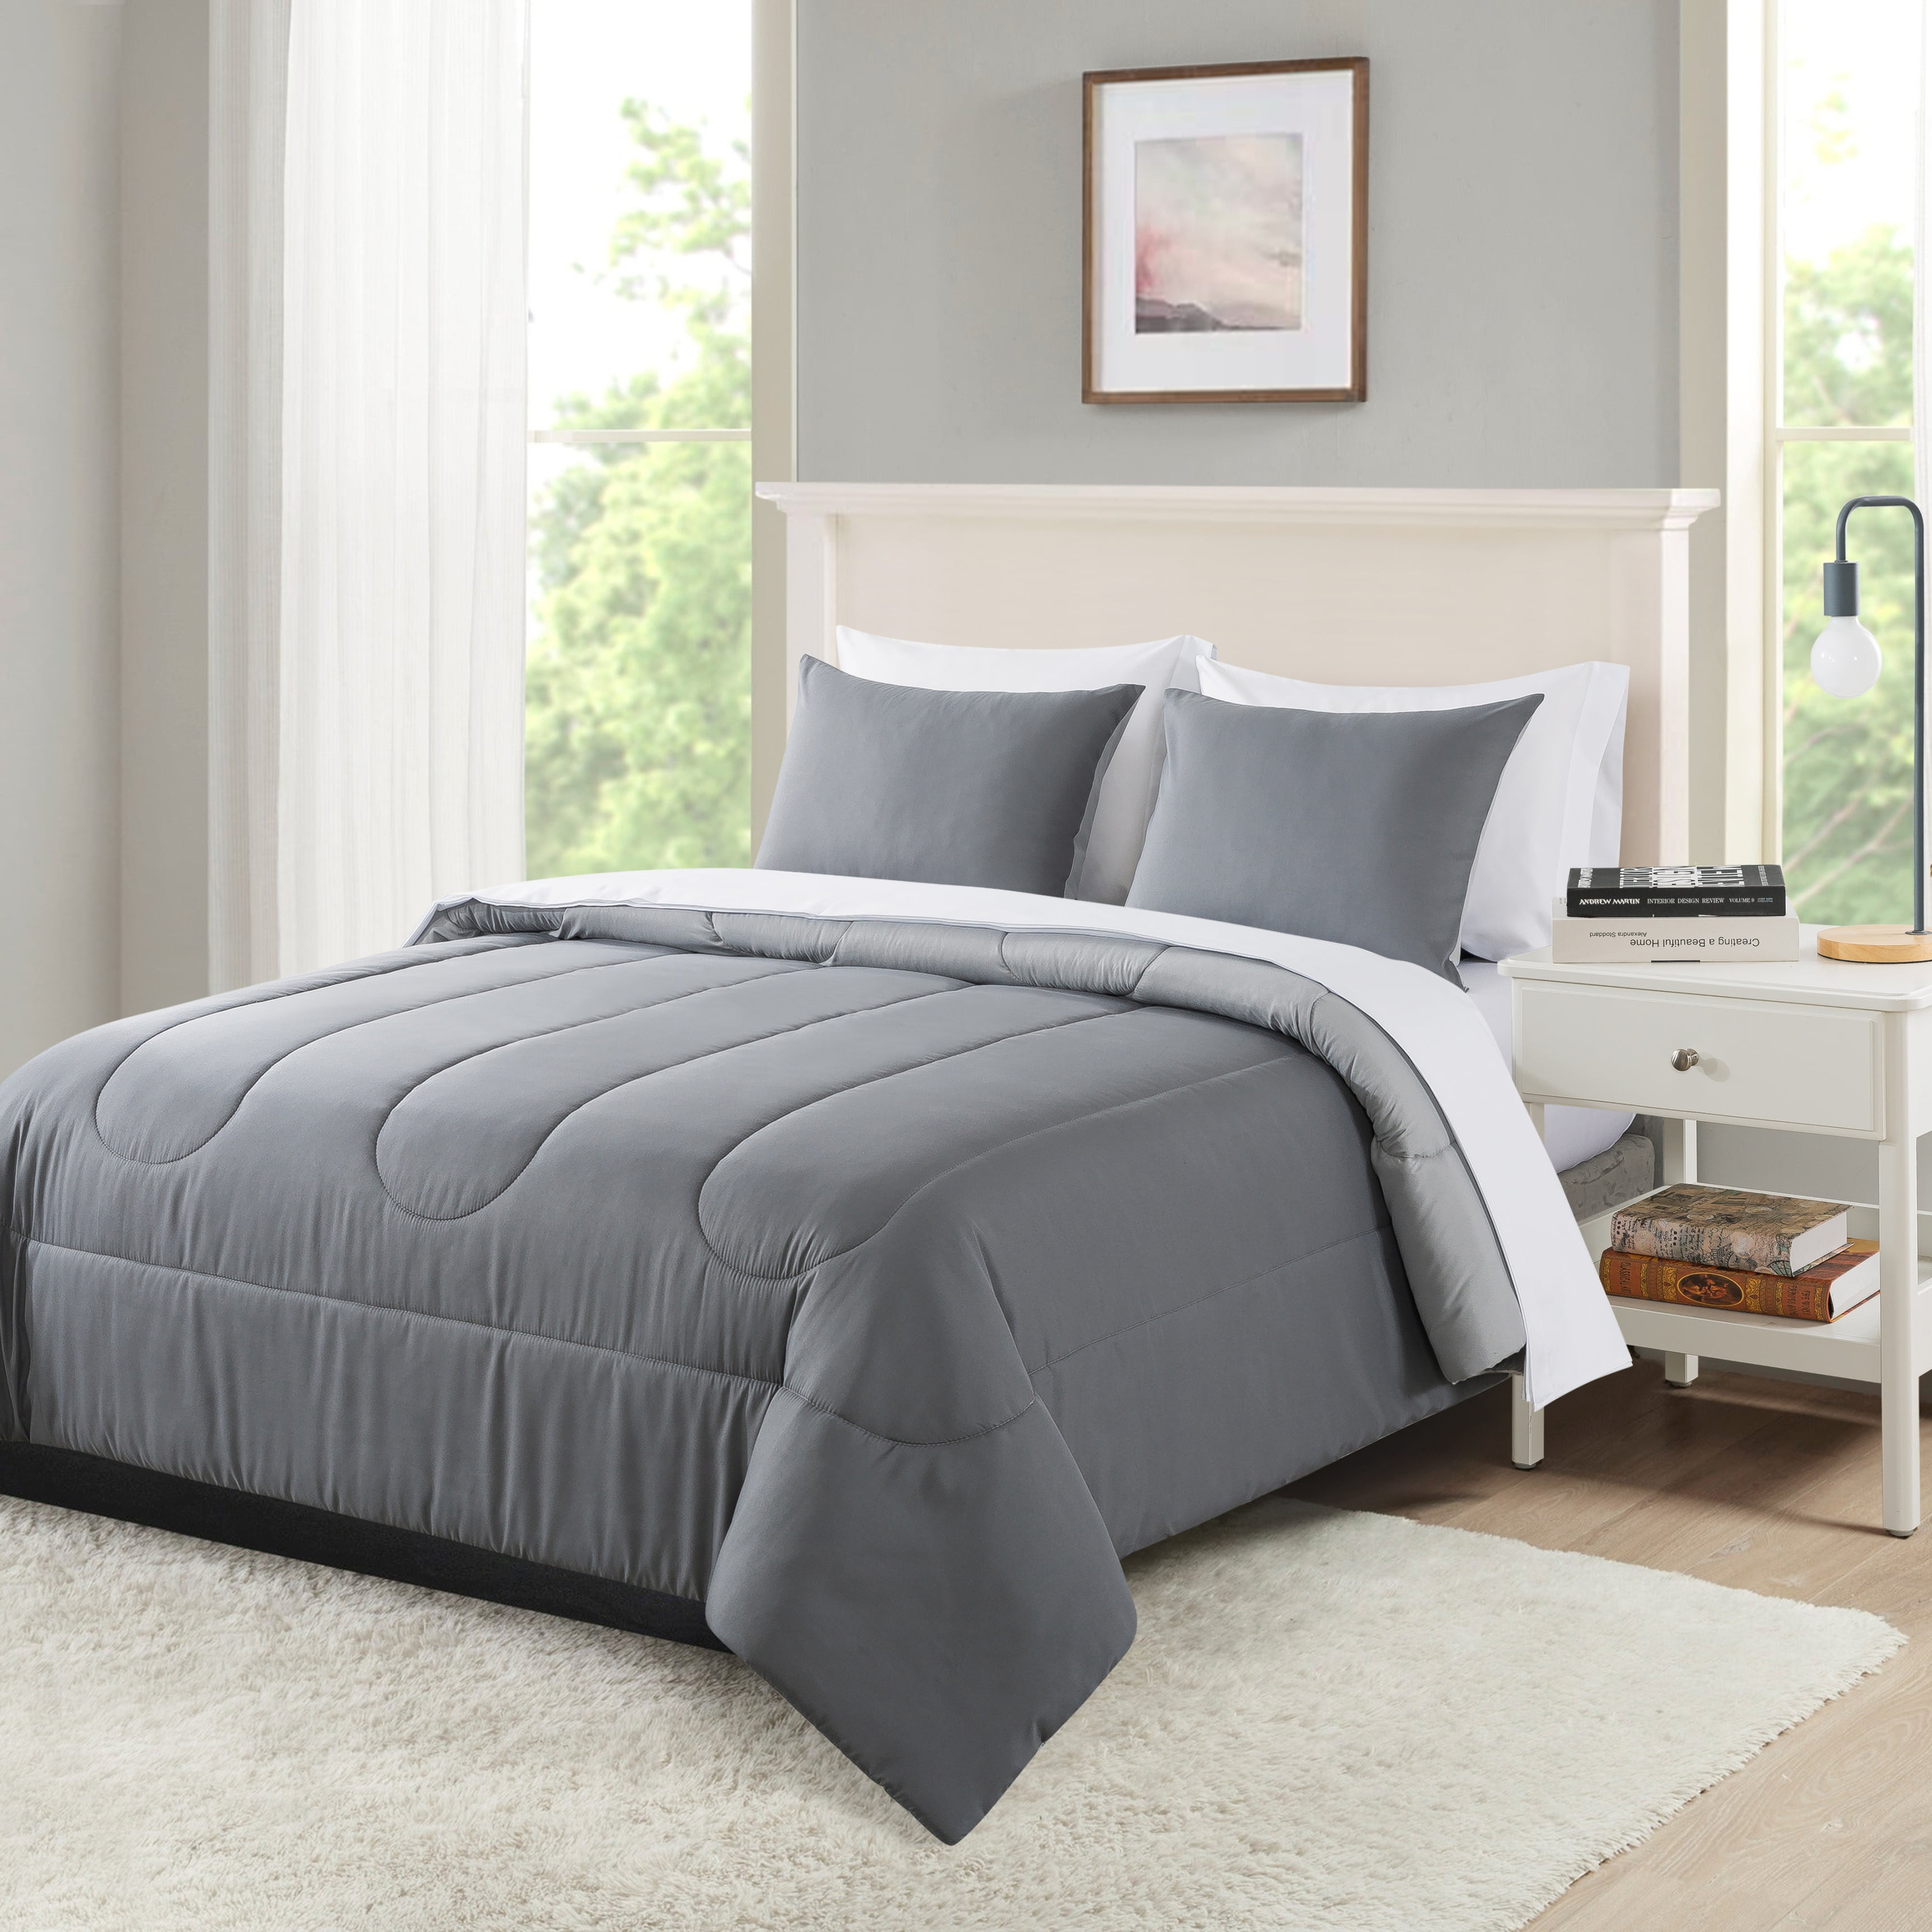 Maple&Stone Gray Comforter Sets for Queen Bed - Grey Bedding Sets Queen,  Bed Set 7 Pieces with Sheet, All Season Grey Bed in a Bag 88x88 inches